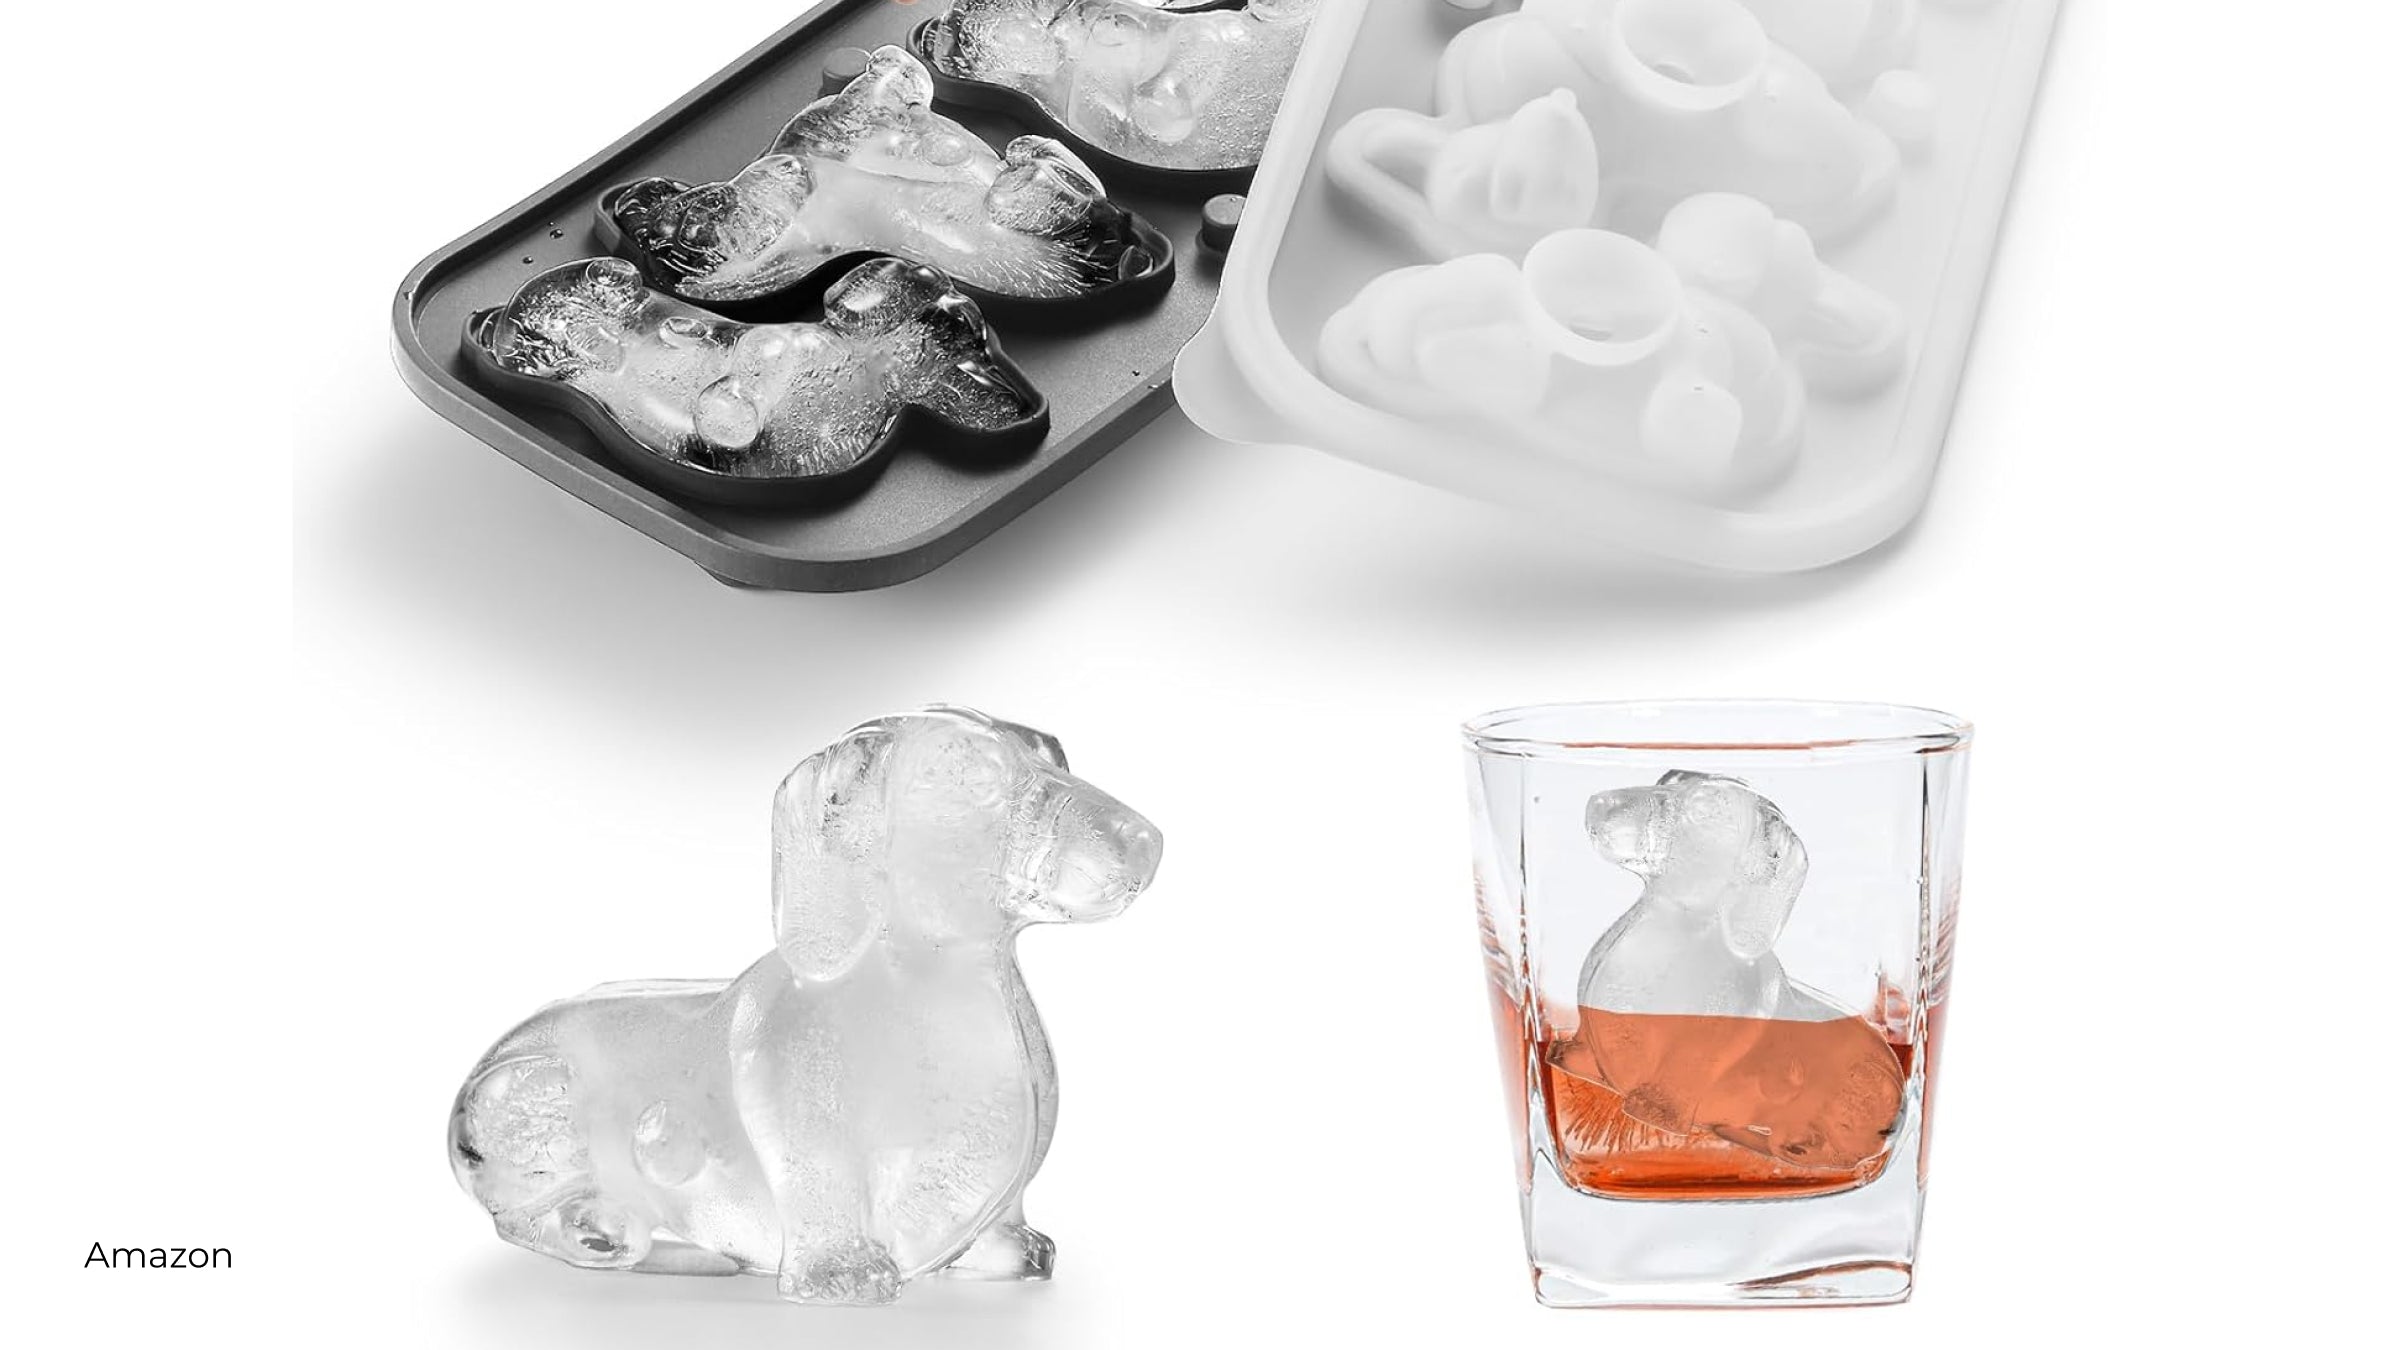 Dachsund ice trays and ice in a glass from Amazon